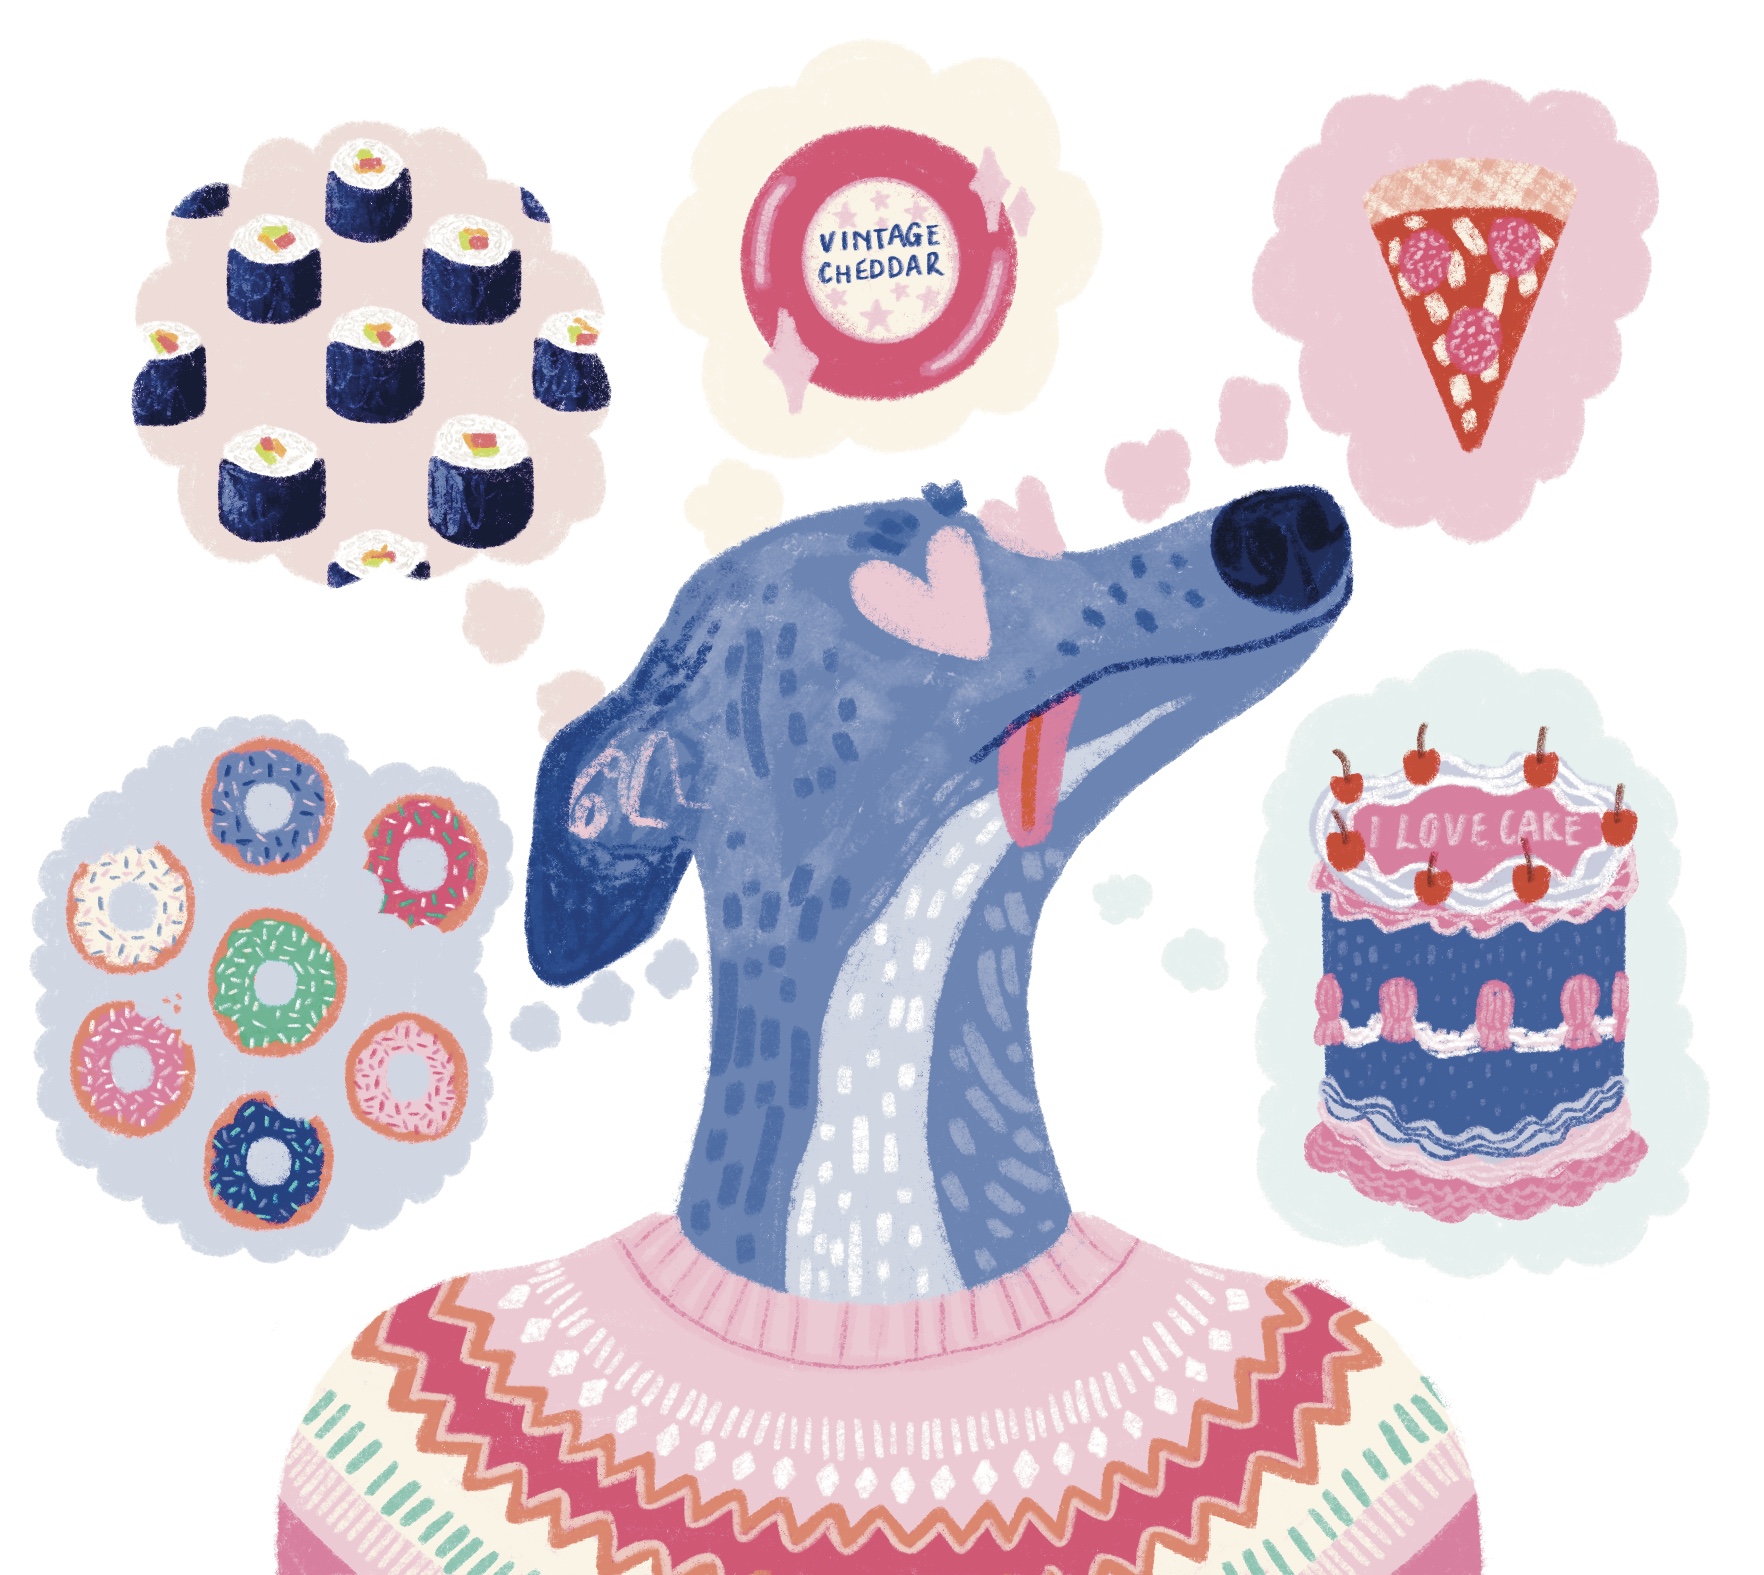 An illustration of a whippet with heart eyes wearing a fairisle knitted jumper, dreaming about its favourite foods!